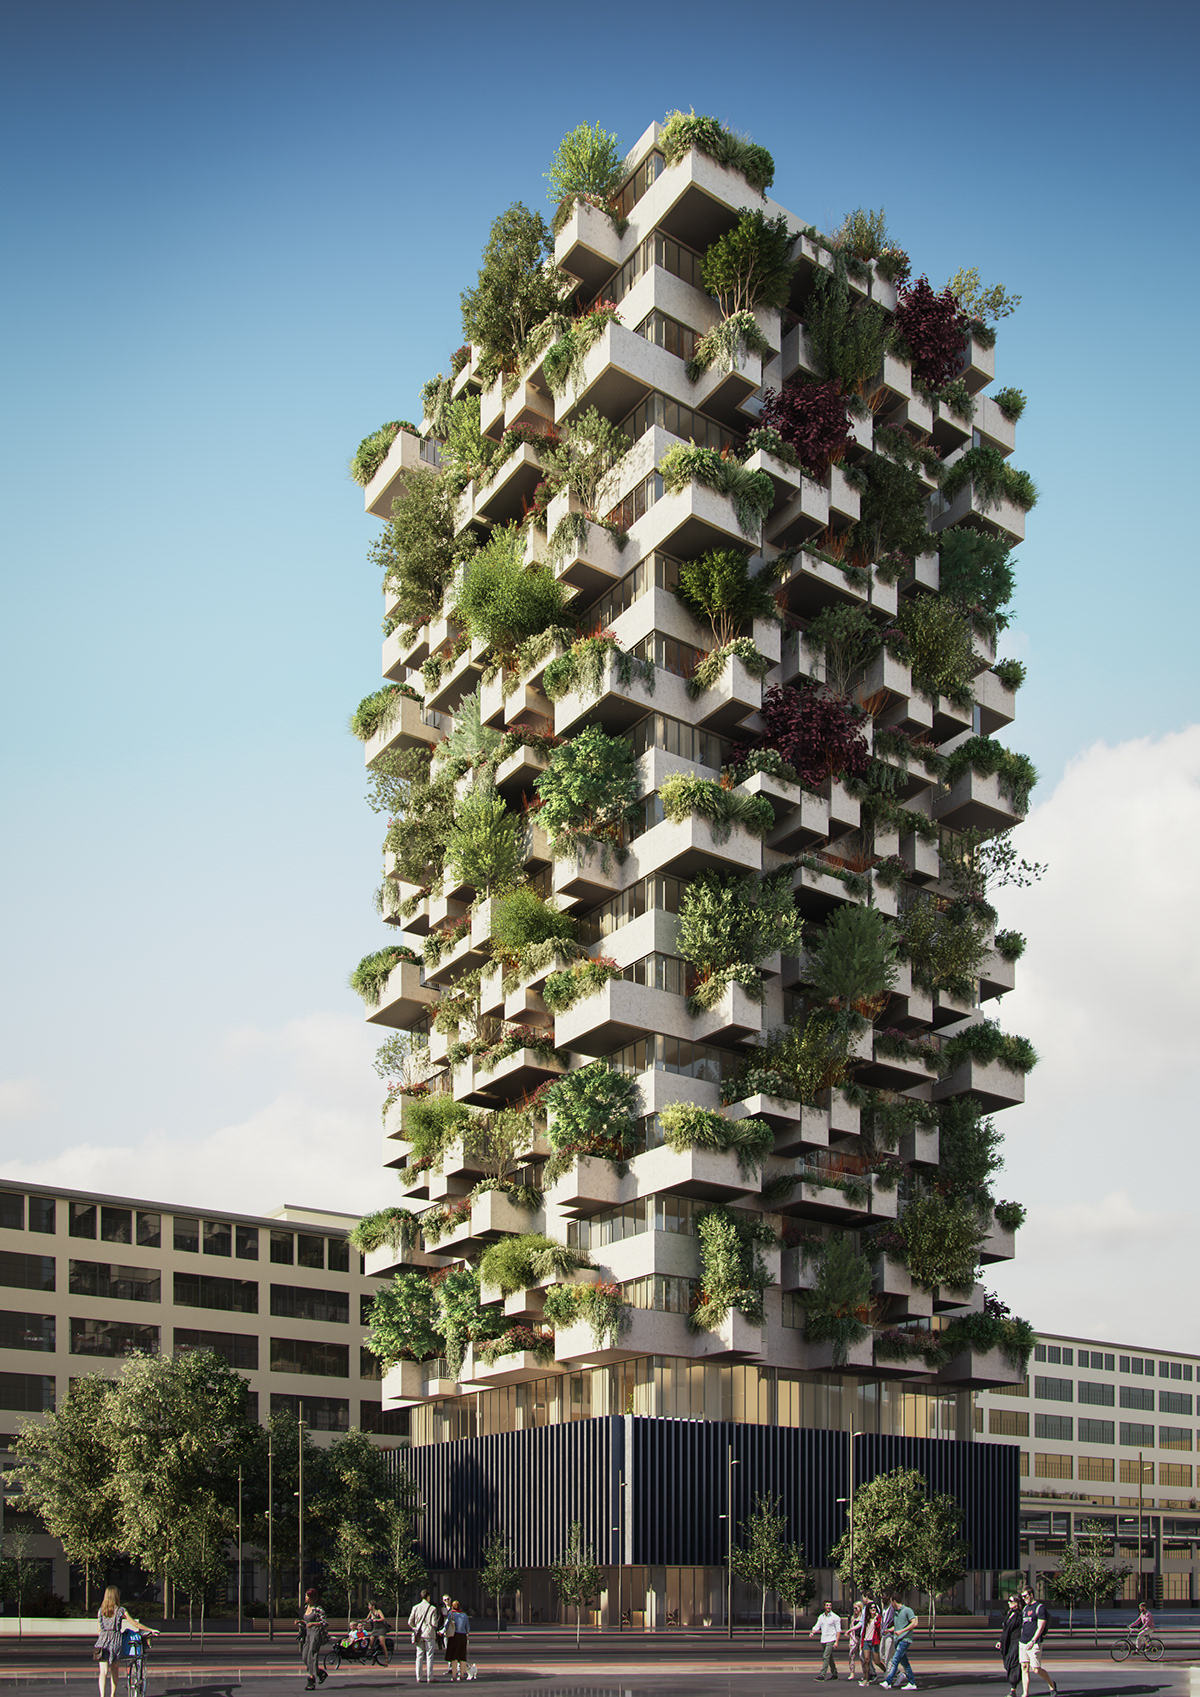 vertical forest rendering 3D ILLUSTRATION  High Rise residential architecture architectural visualization Render artist impression